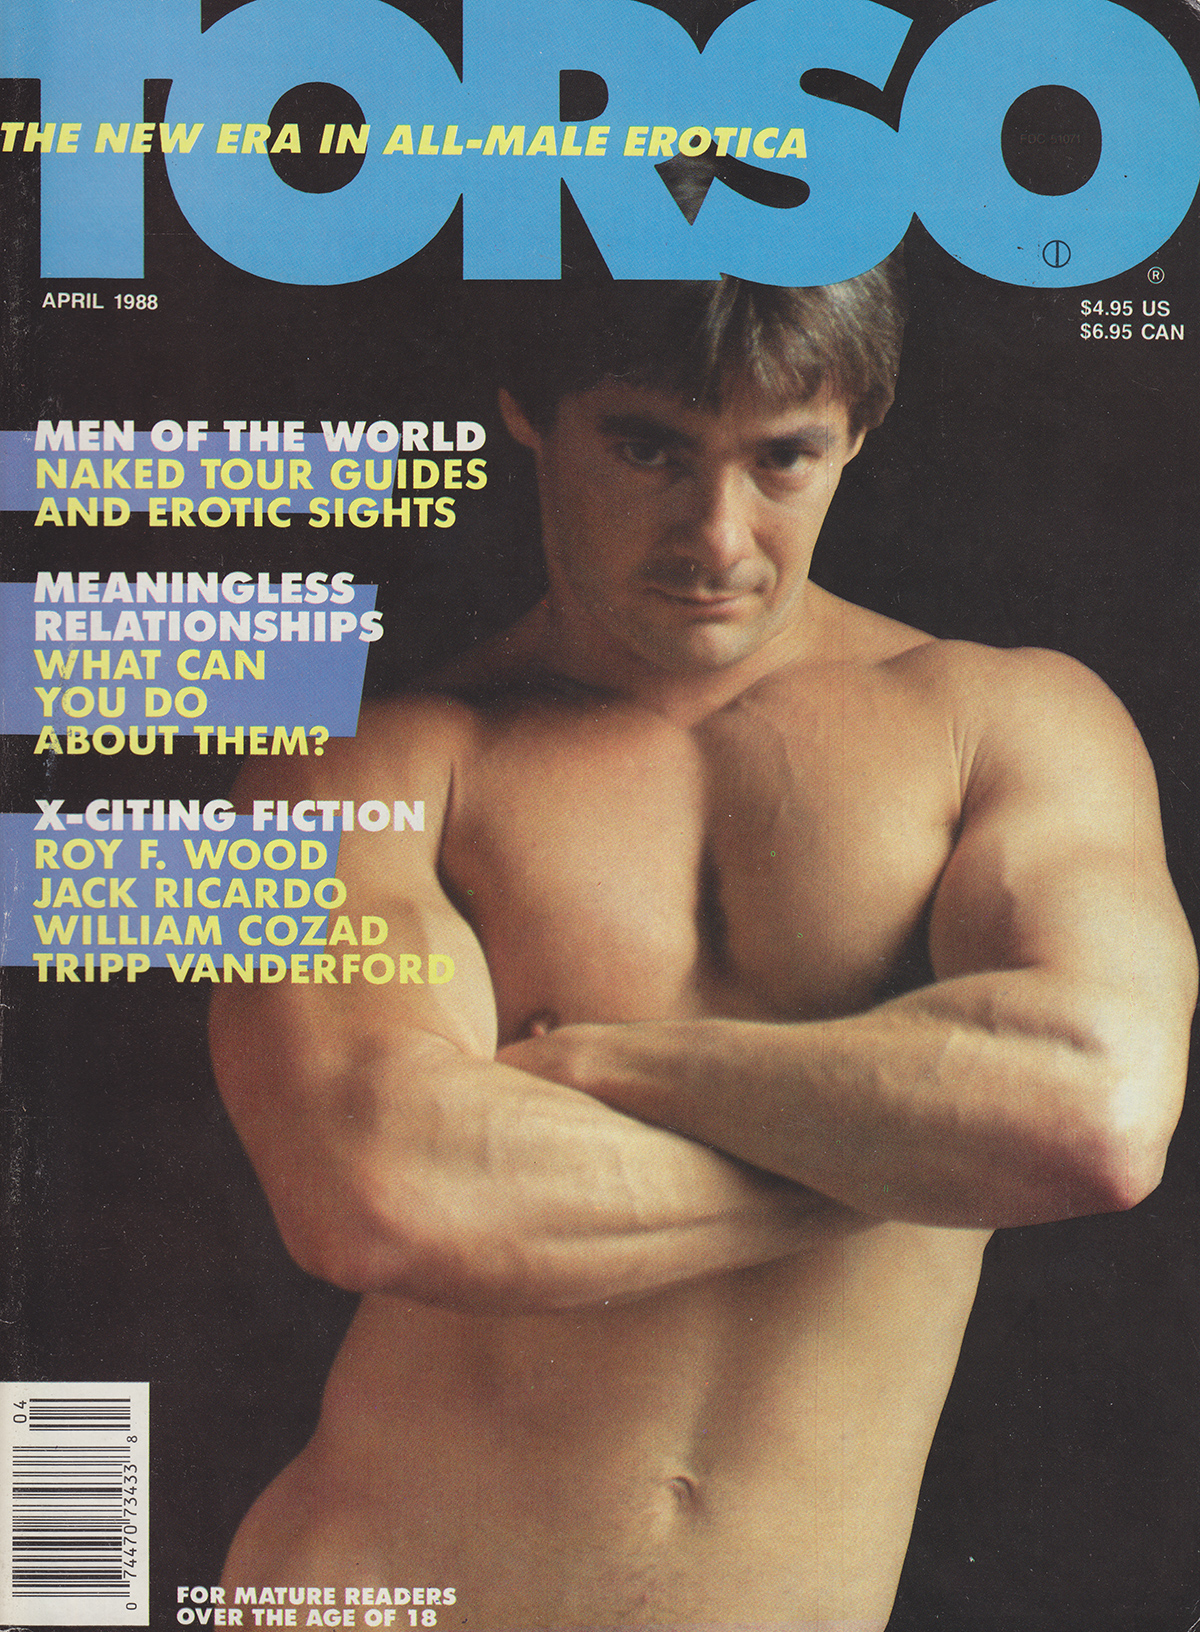 Torso April 1988 magazine back issue Torso magizine back copy Torso April 1988 Gay Adult Magazine Back Issue Naked Men Published by Torso Publishing Group. Coverguy & Centerfold French Photographed by Lobo Studios.